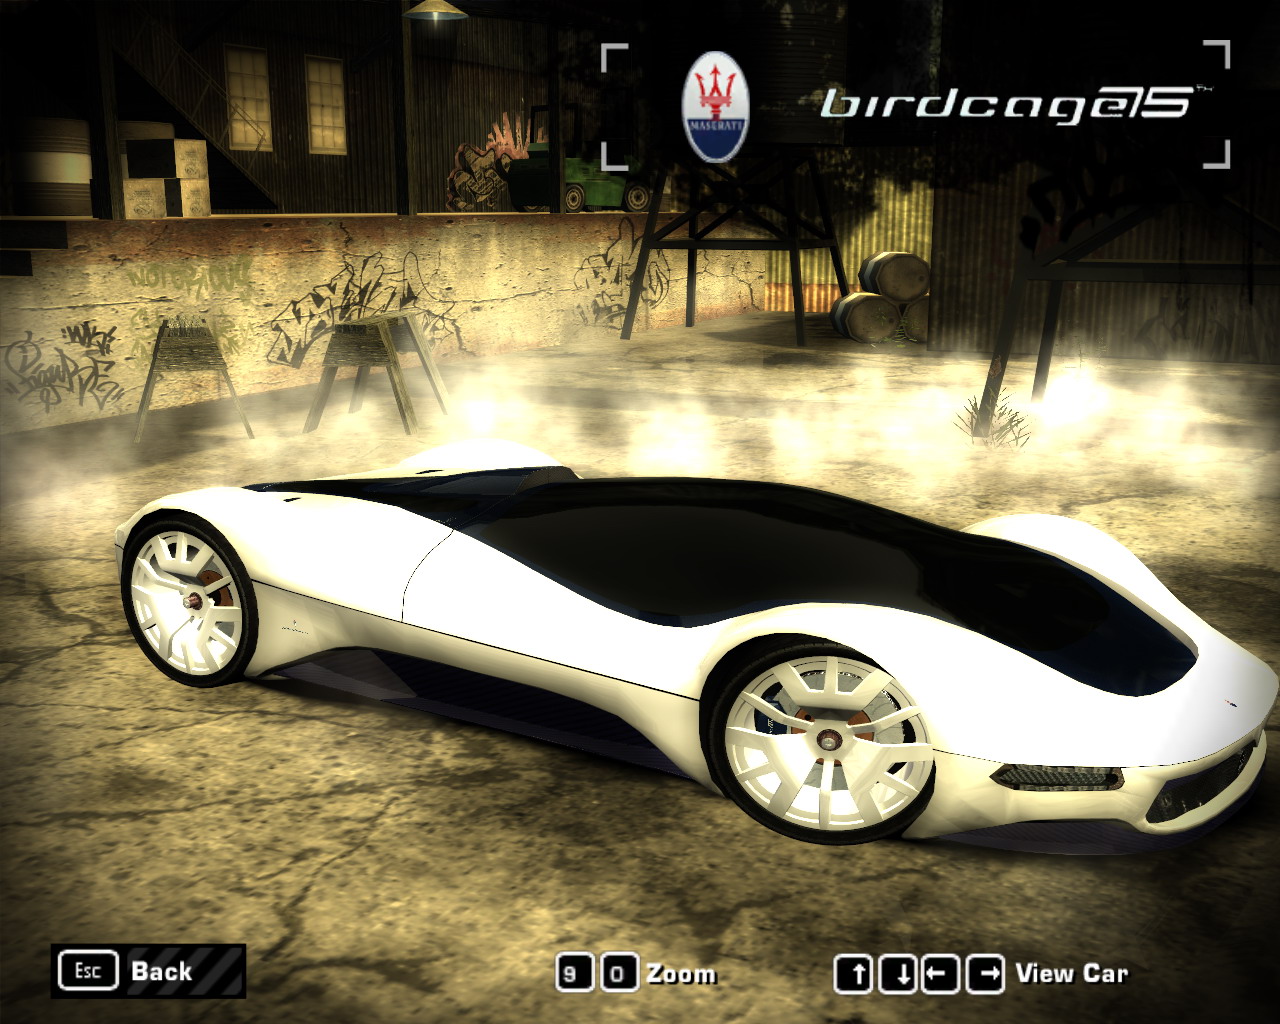 Need For Speed Most Wanted Maserati Birdcage 75th